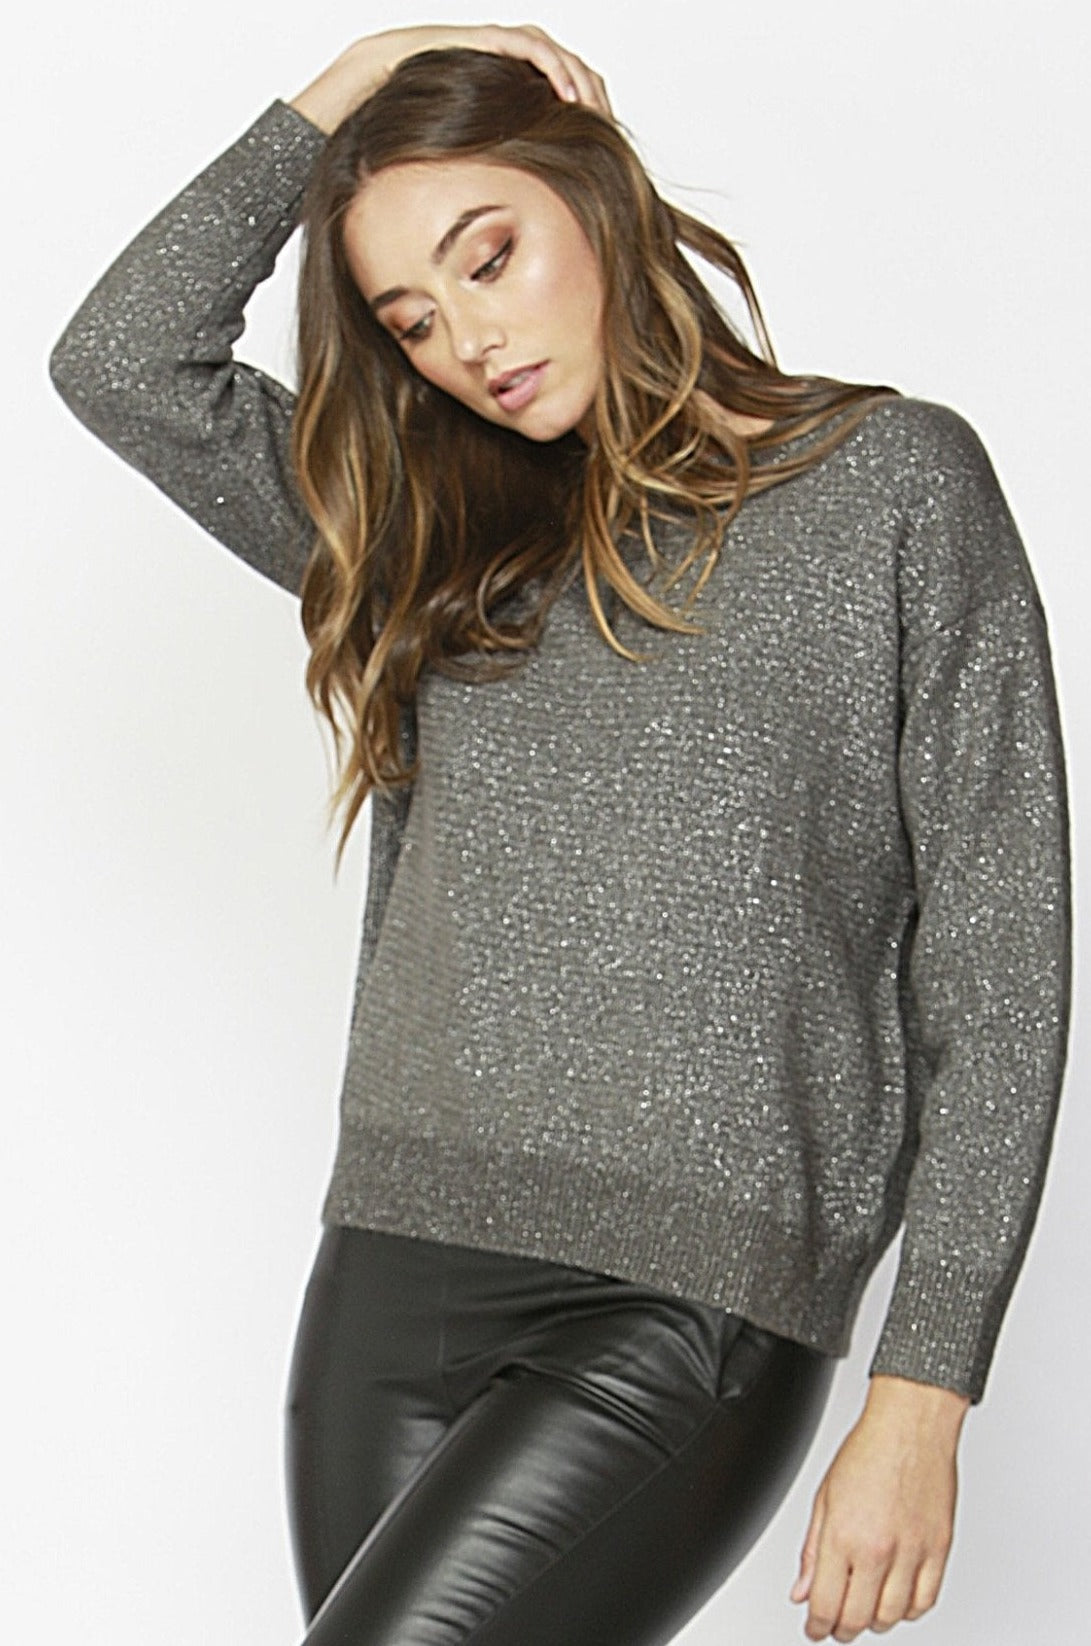 Sass Shimmer Down Jumper in Charcoal Grey - Hey Sara